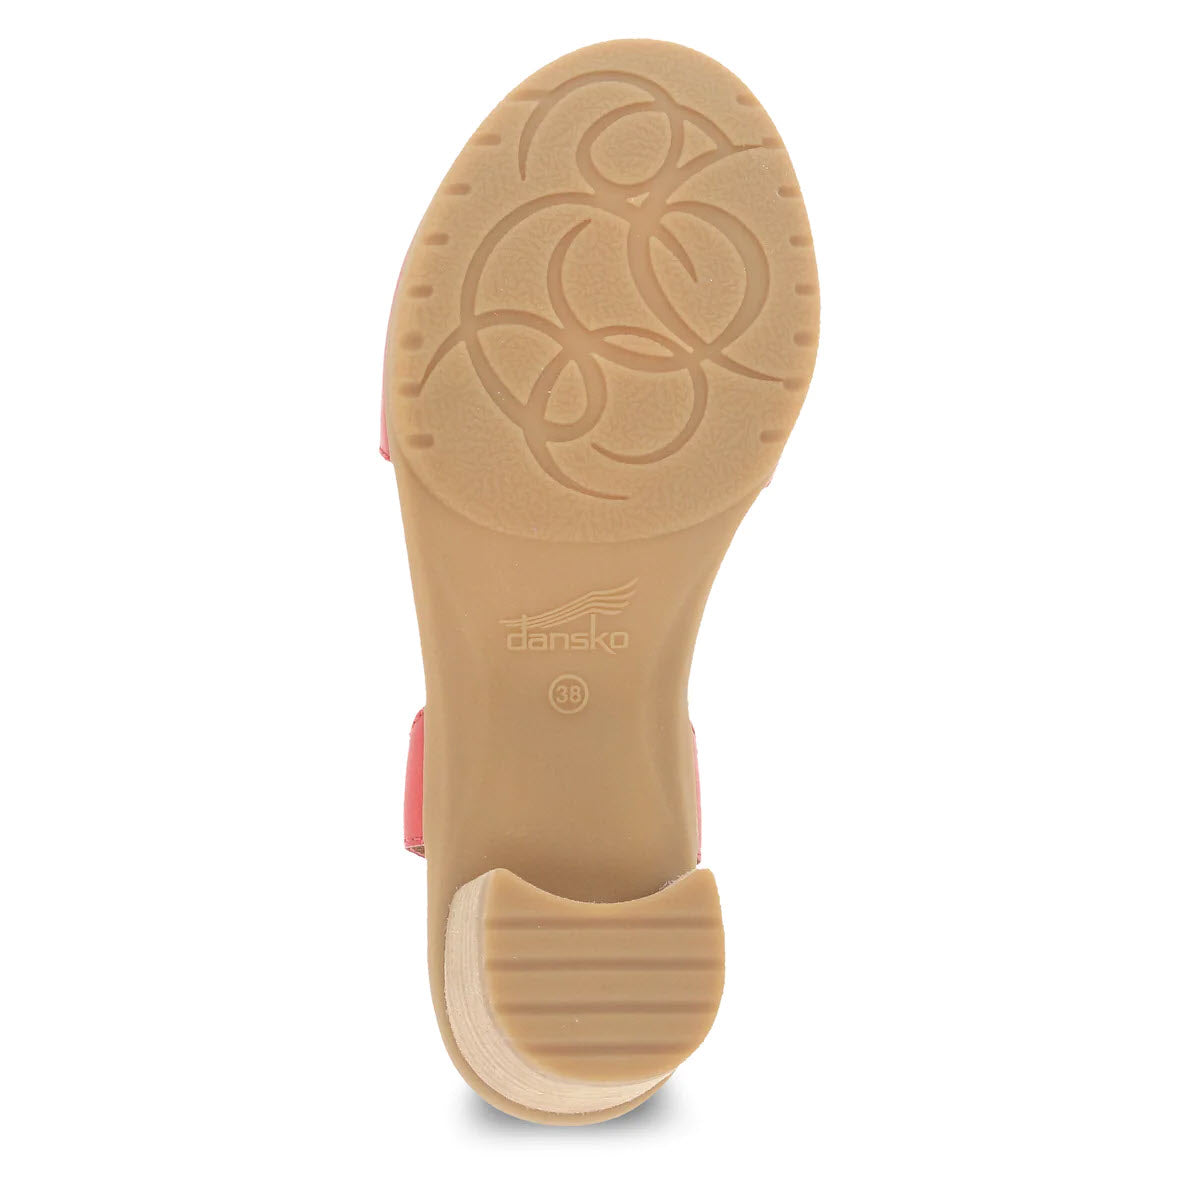 Bottom view of a comfortable heeled sandal showing a beige sole with circular patterns and the Dansko logo.